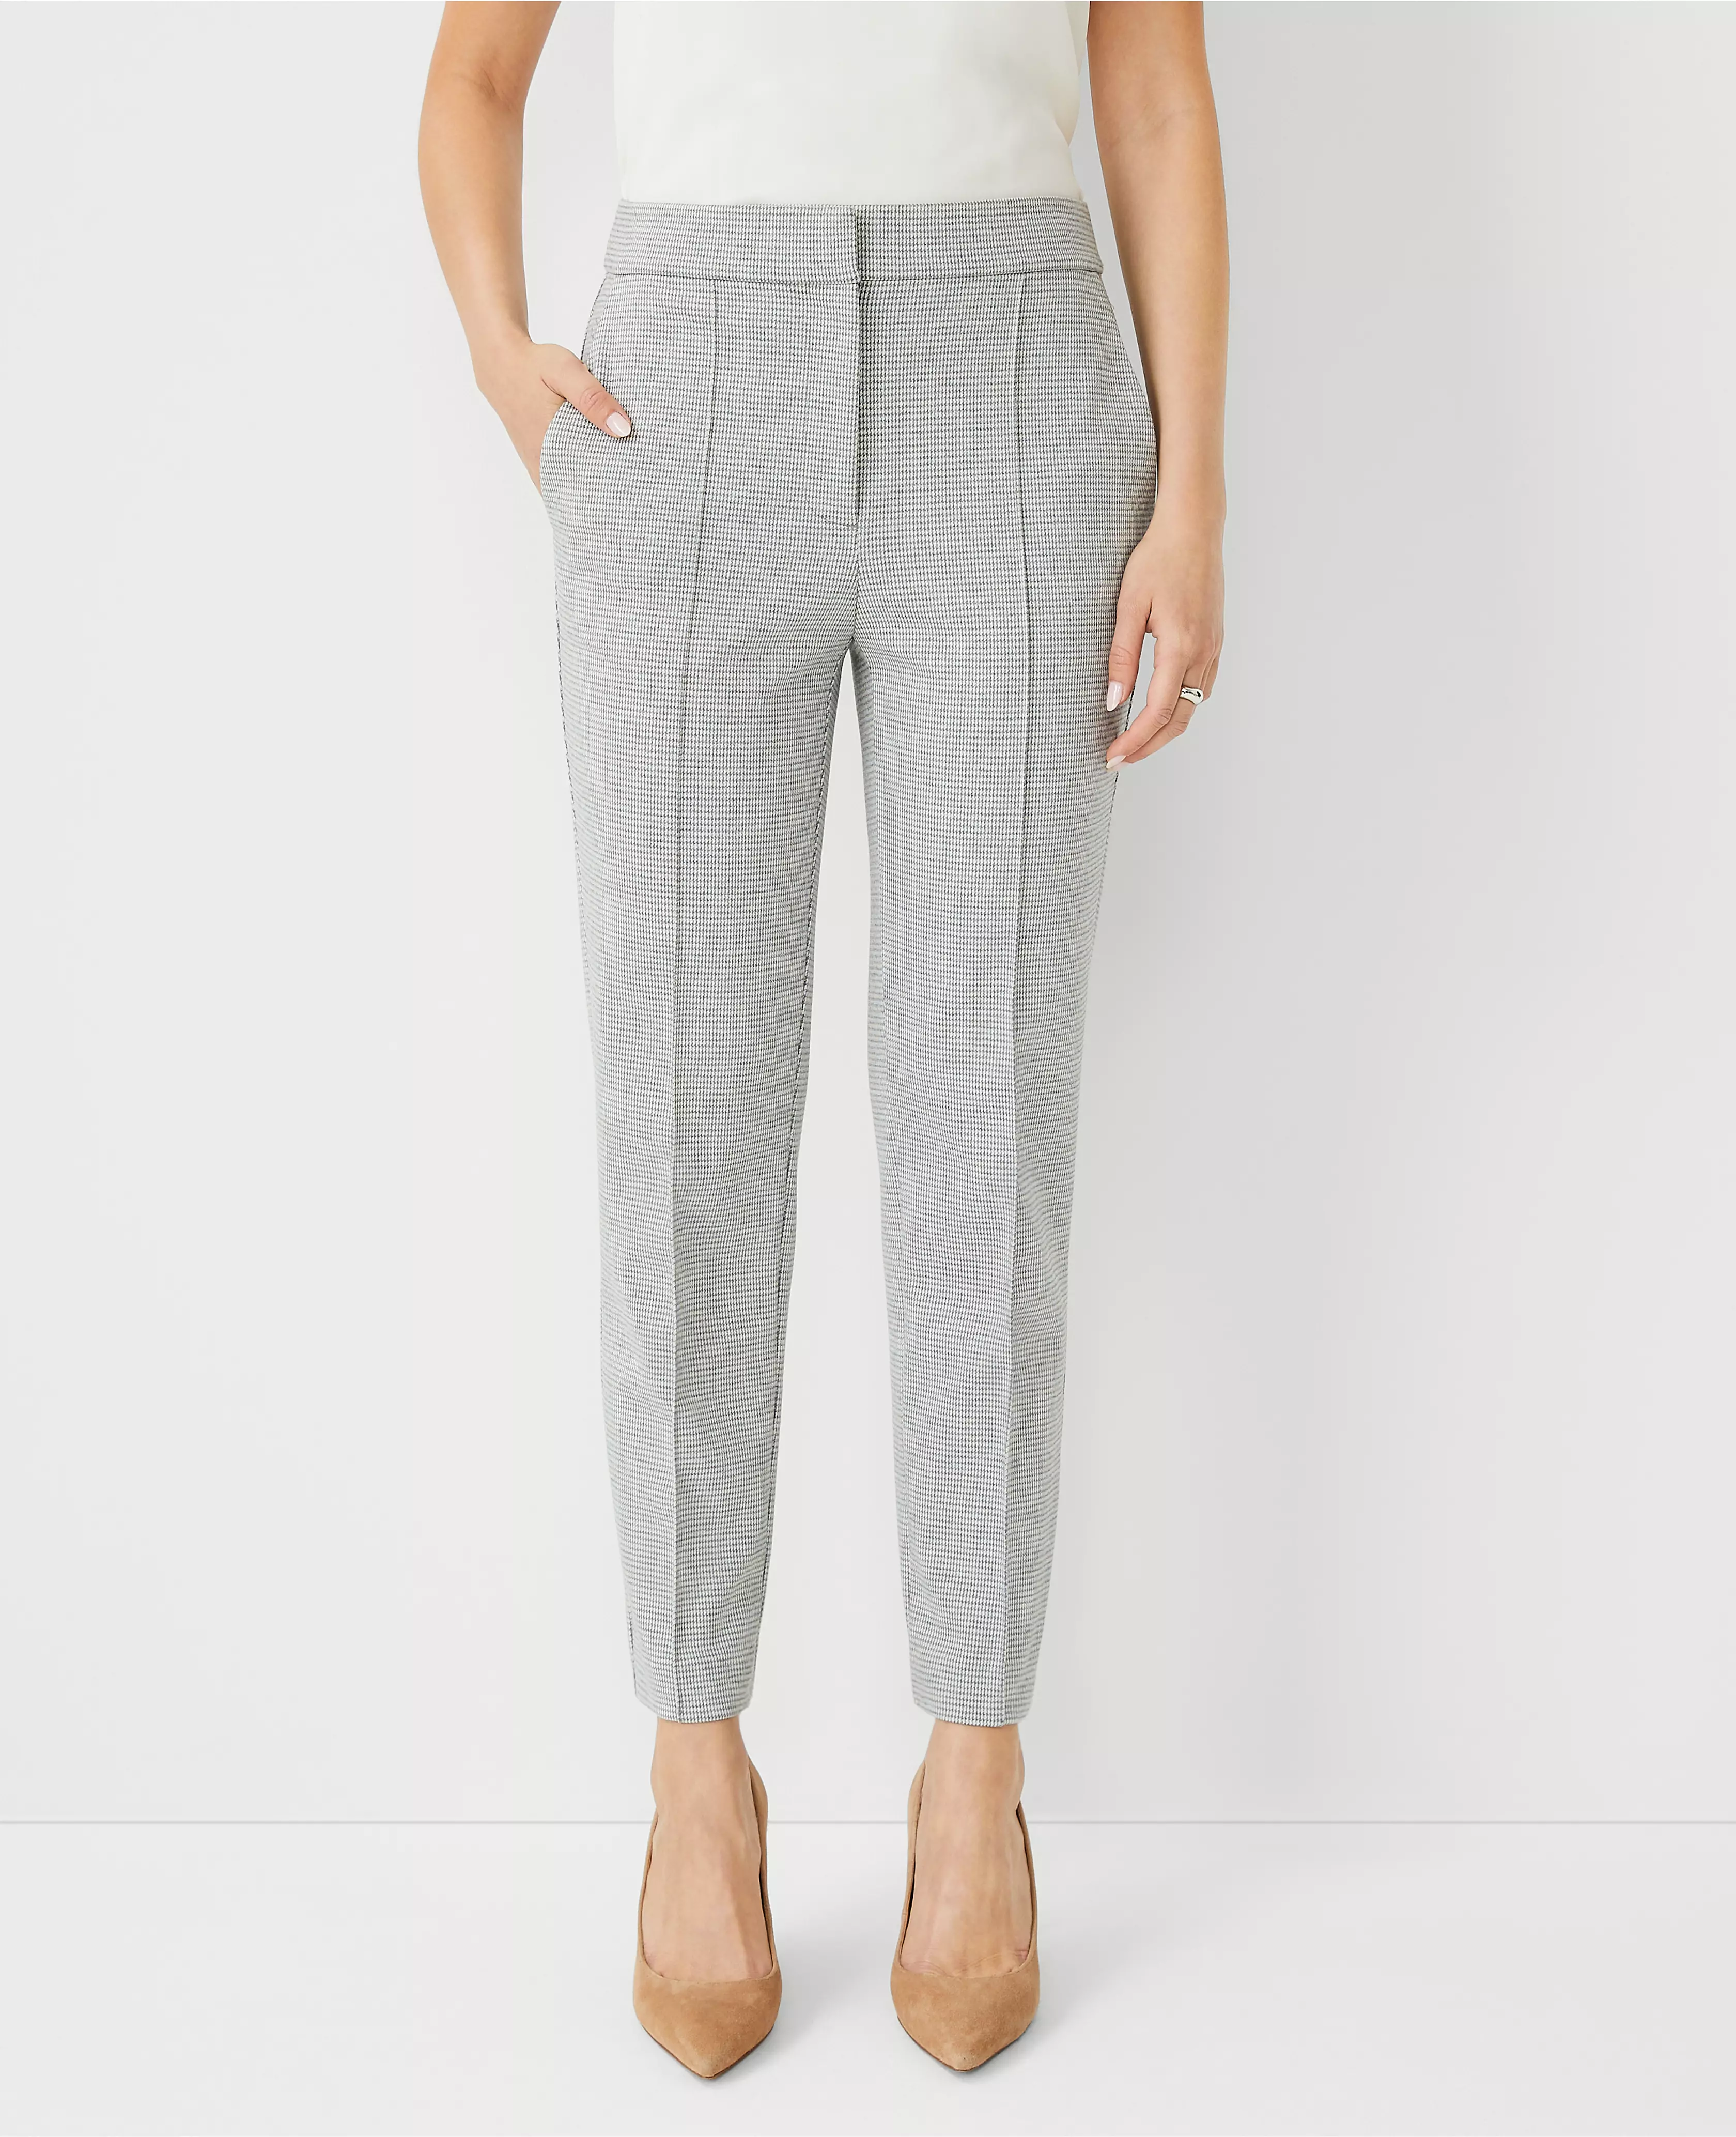 The Eva Ankle Pant in Houndstooth Knit